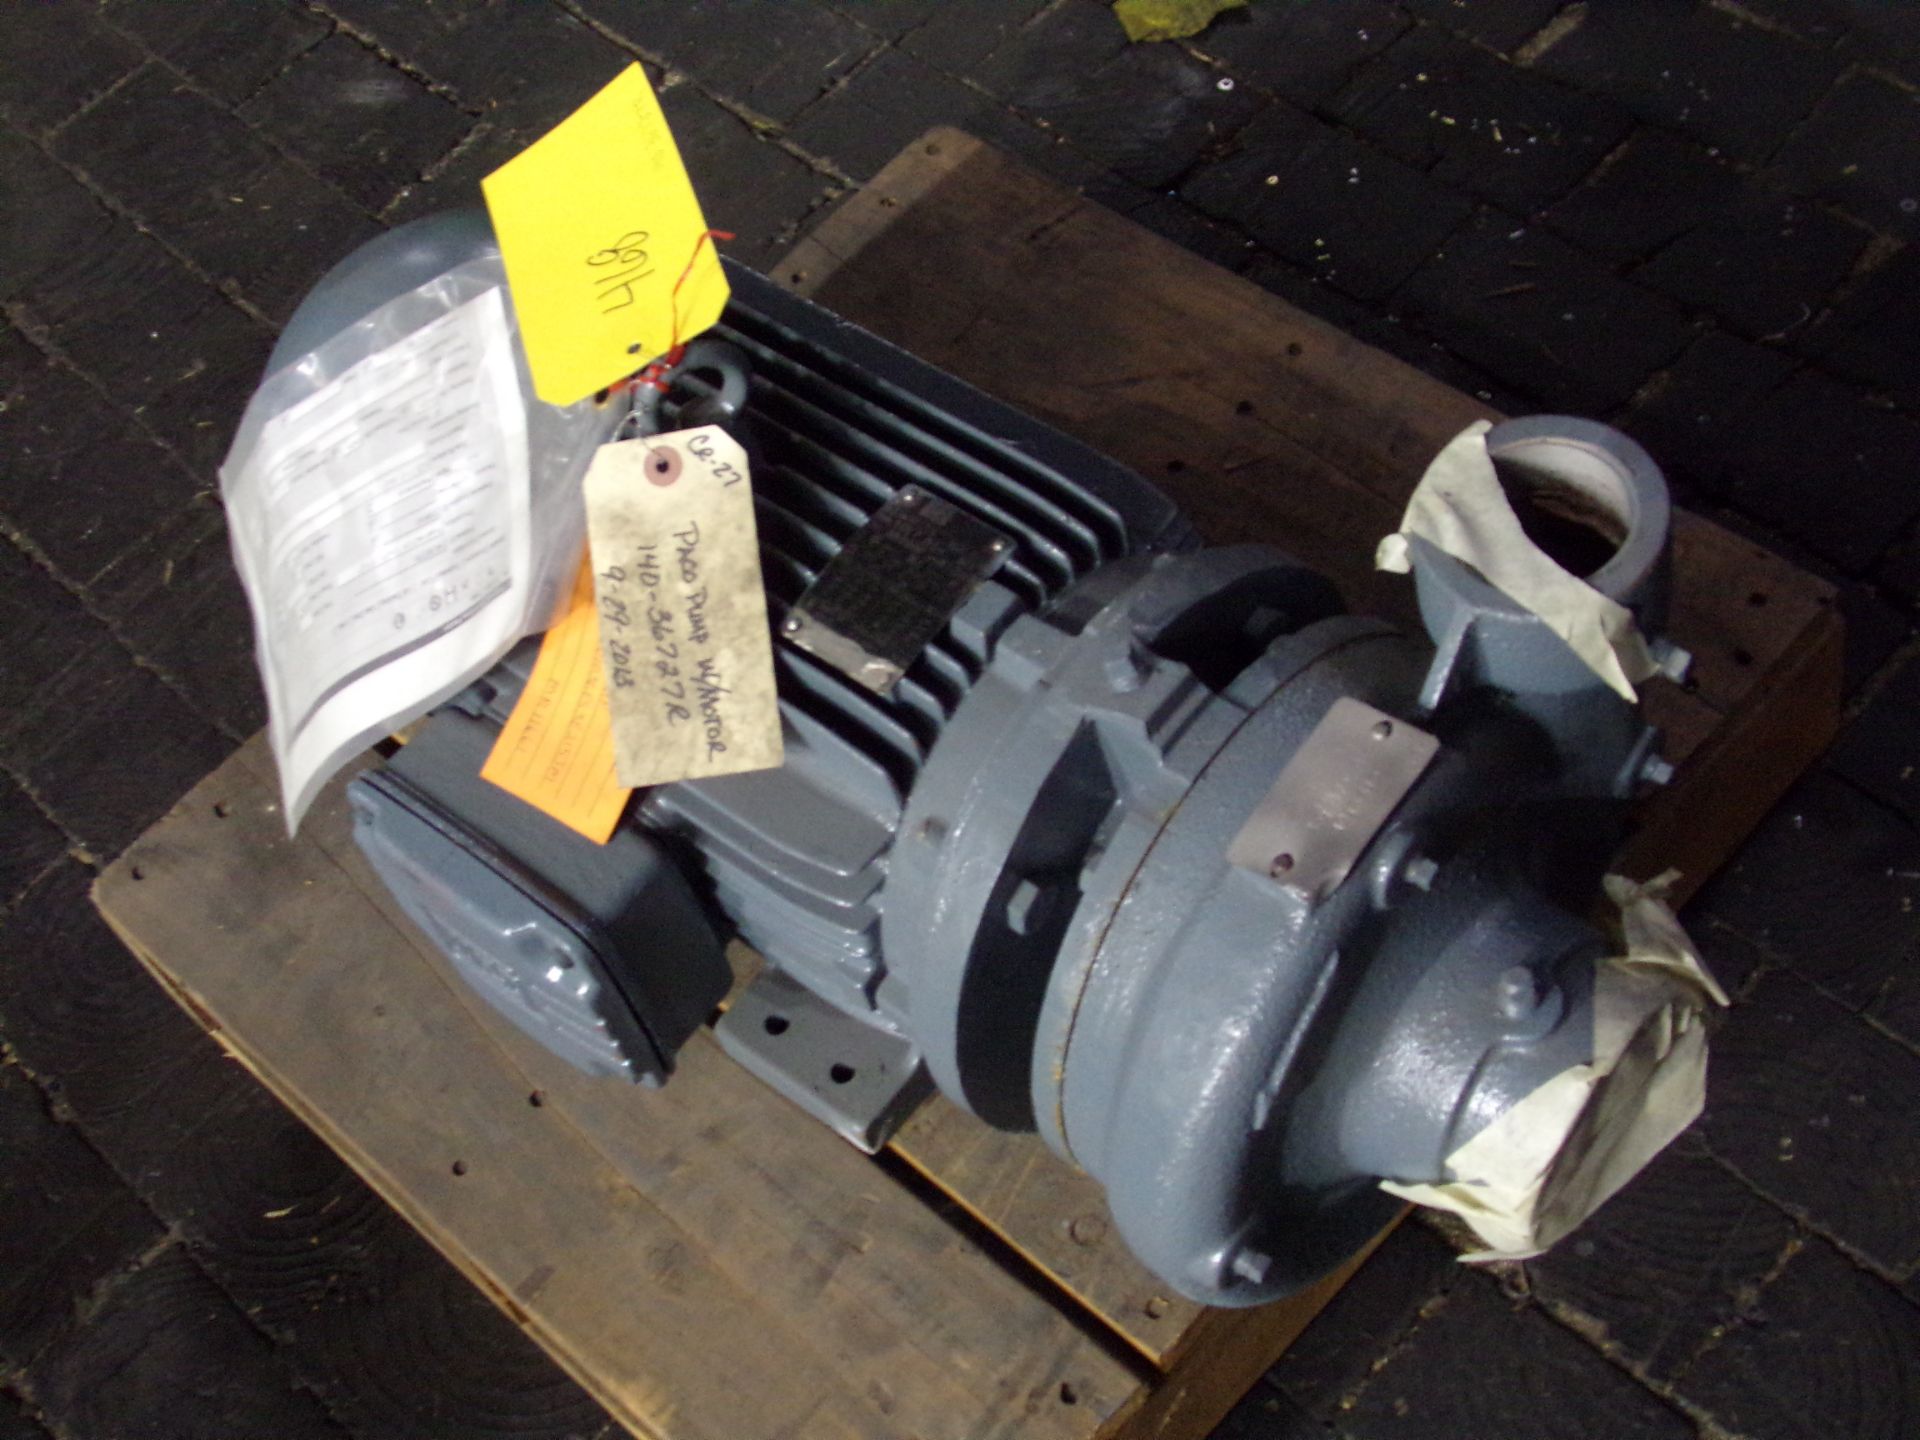 WEG ELECTRIC MOTOR 10HP 60 HZ 3475 RPM W213/5JM FRAME WITH PACO PUMP ATTACHED - Image 9 of 9